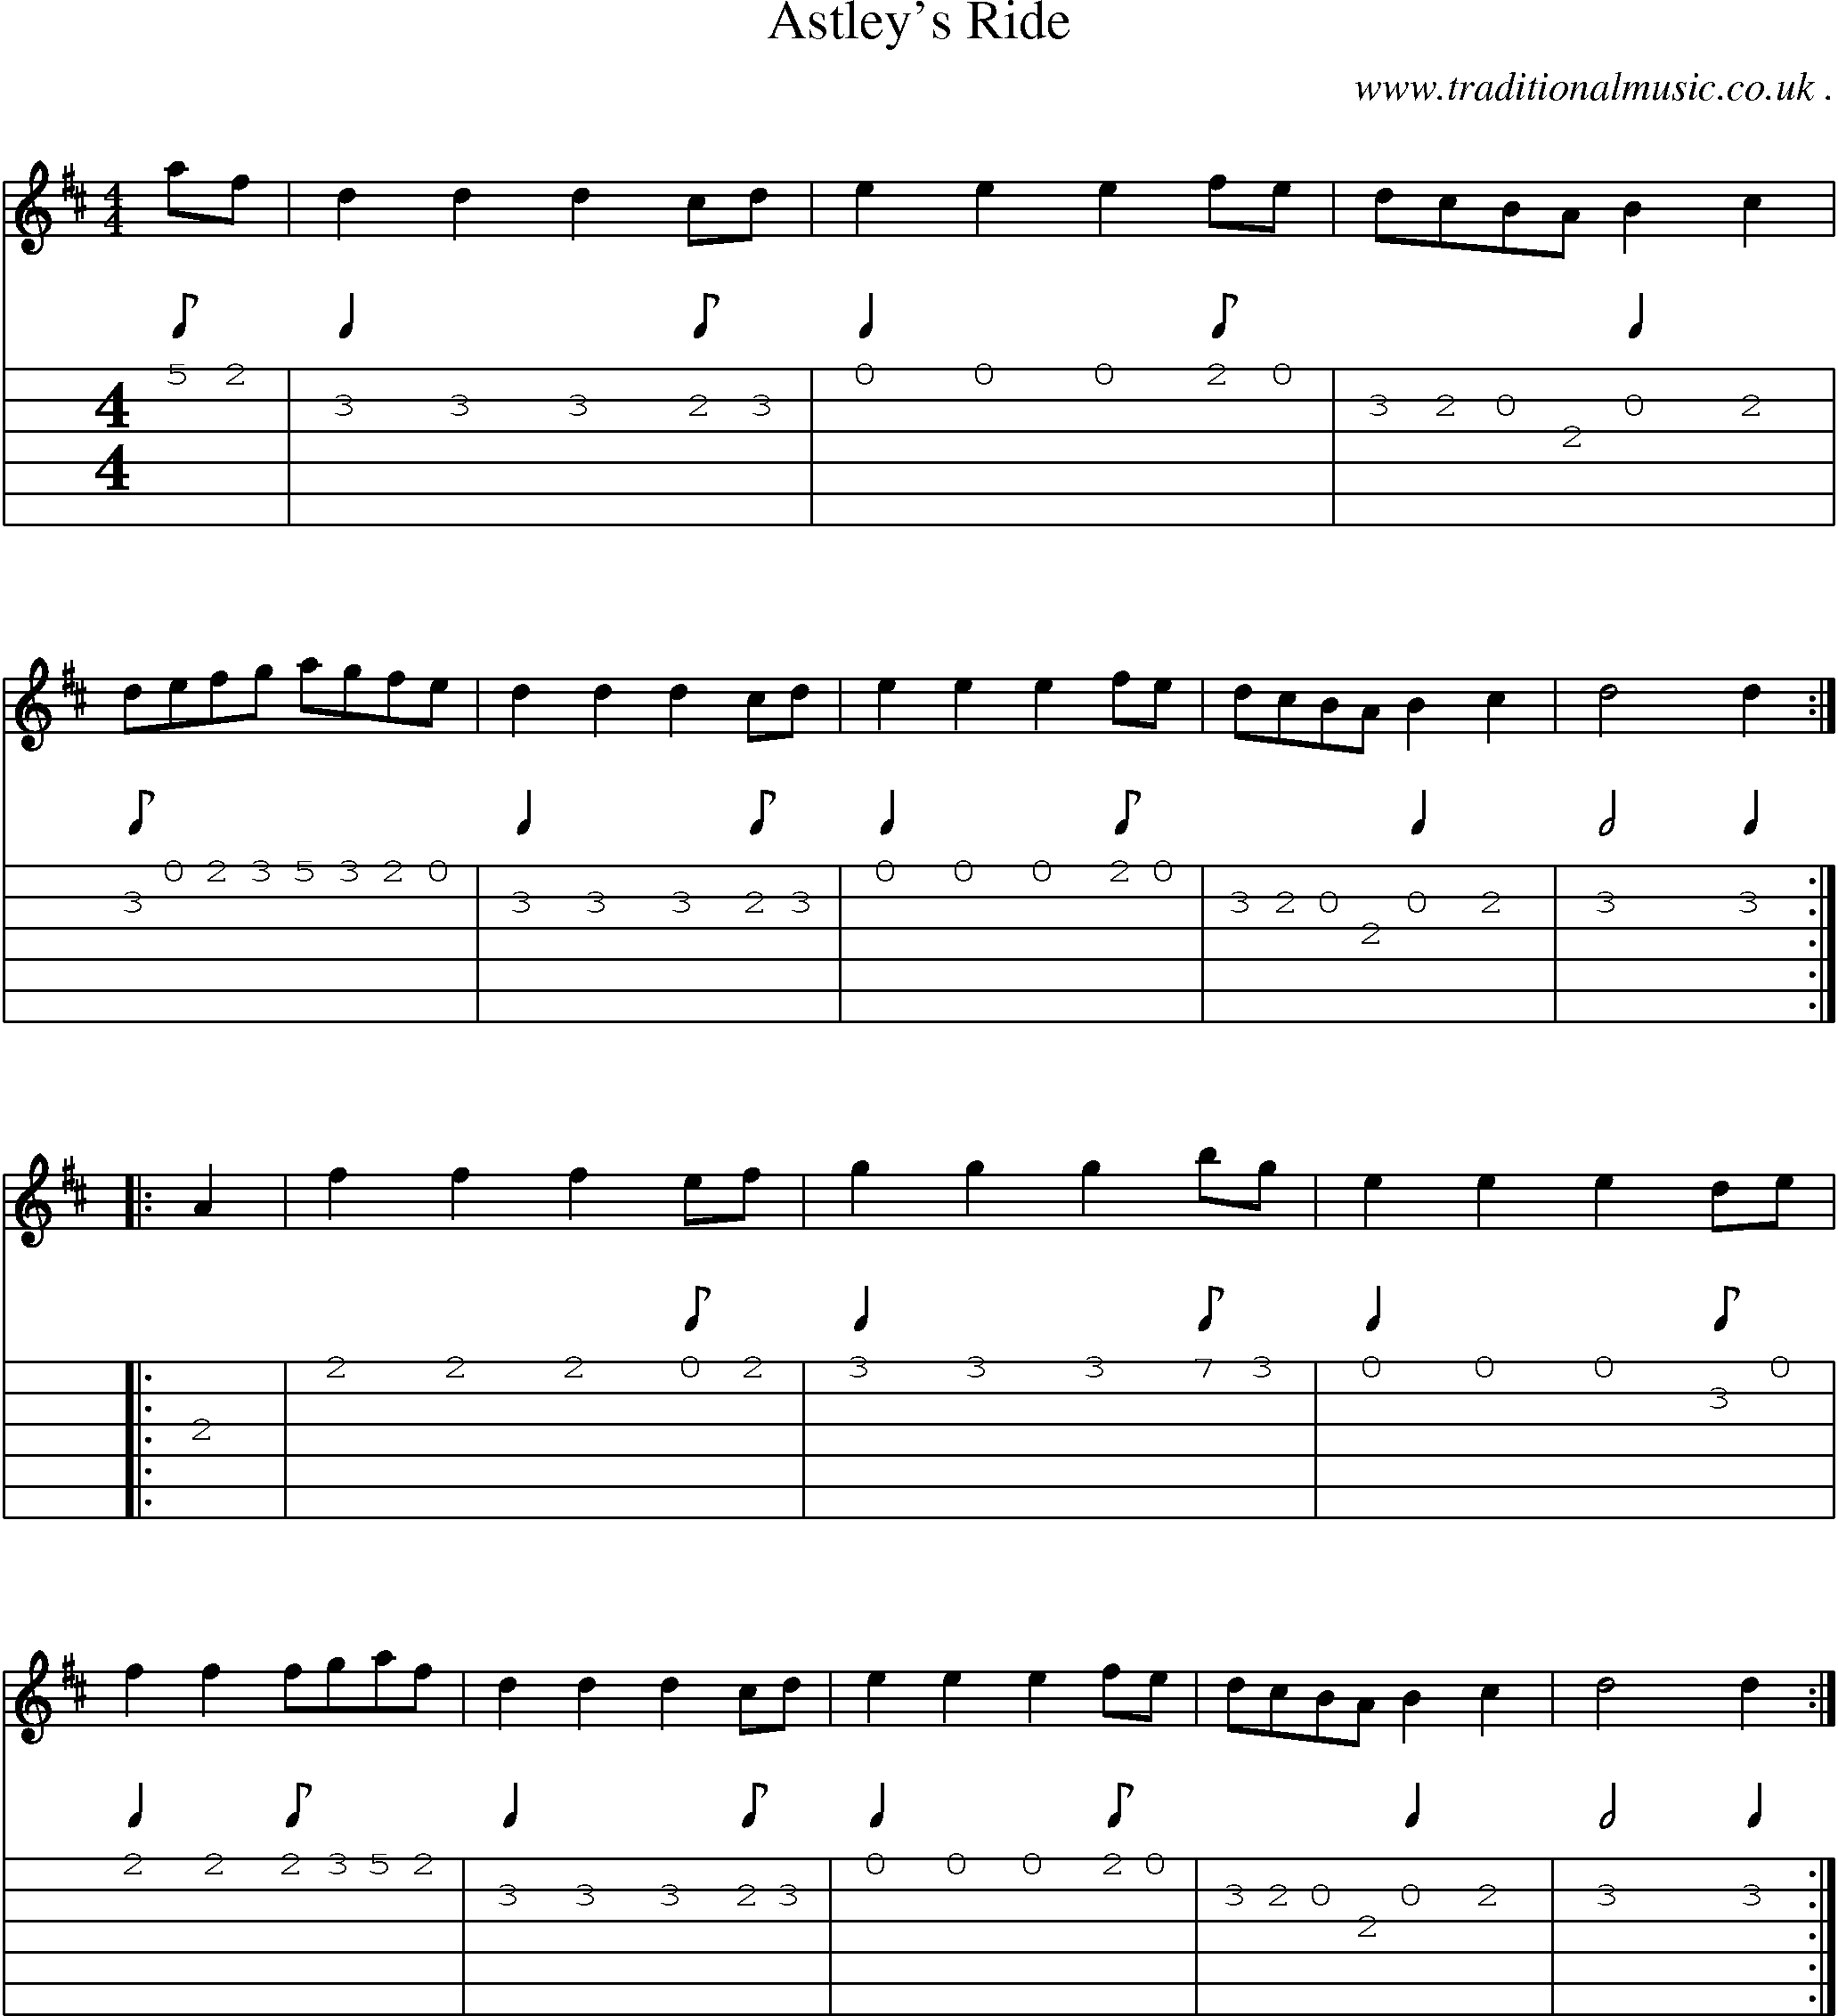 Sheet-Music and Guitar Tabs for Astleys Ride